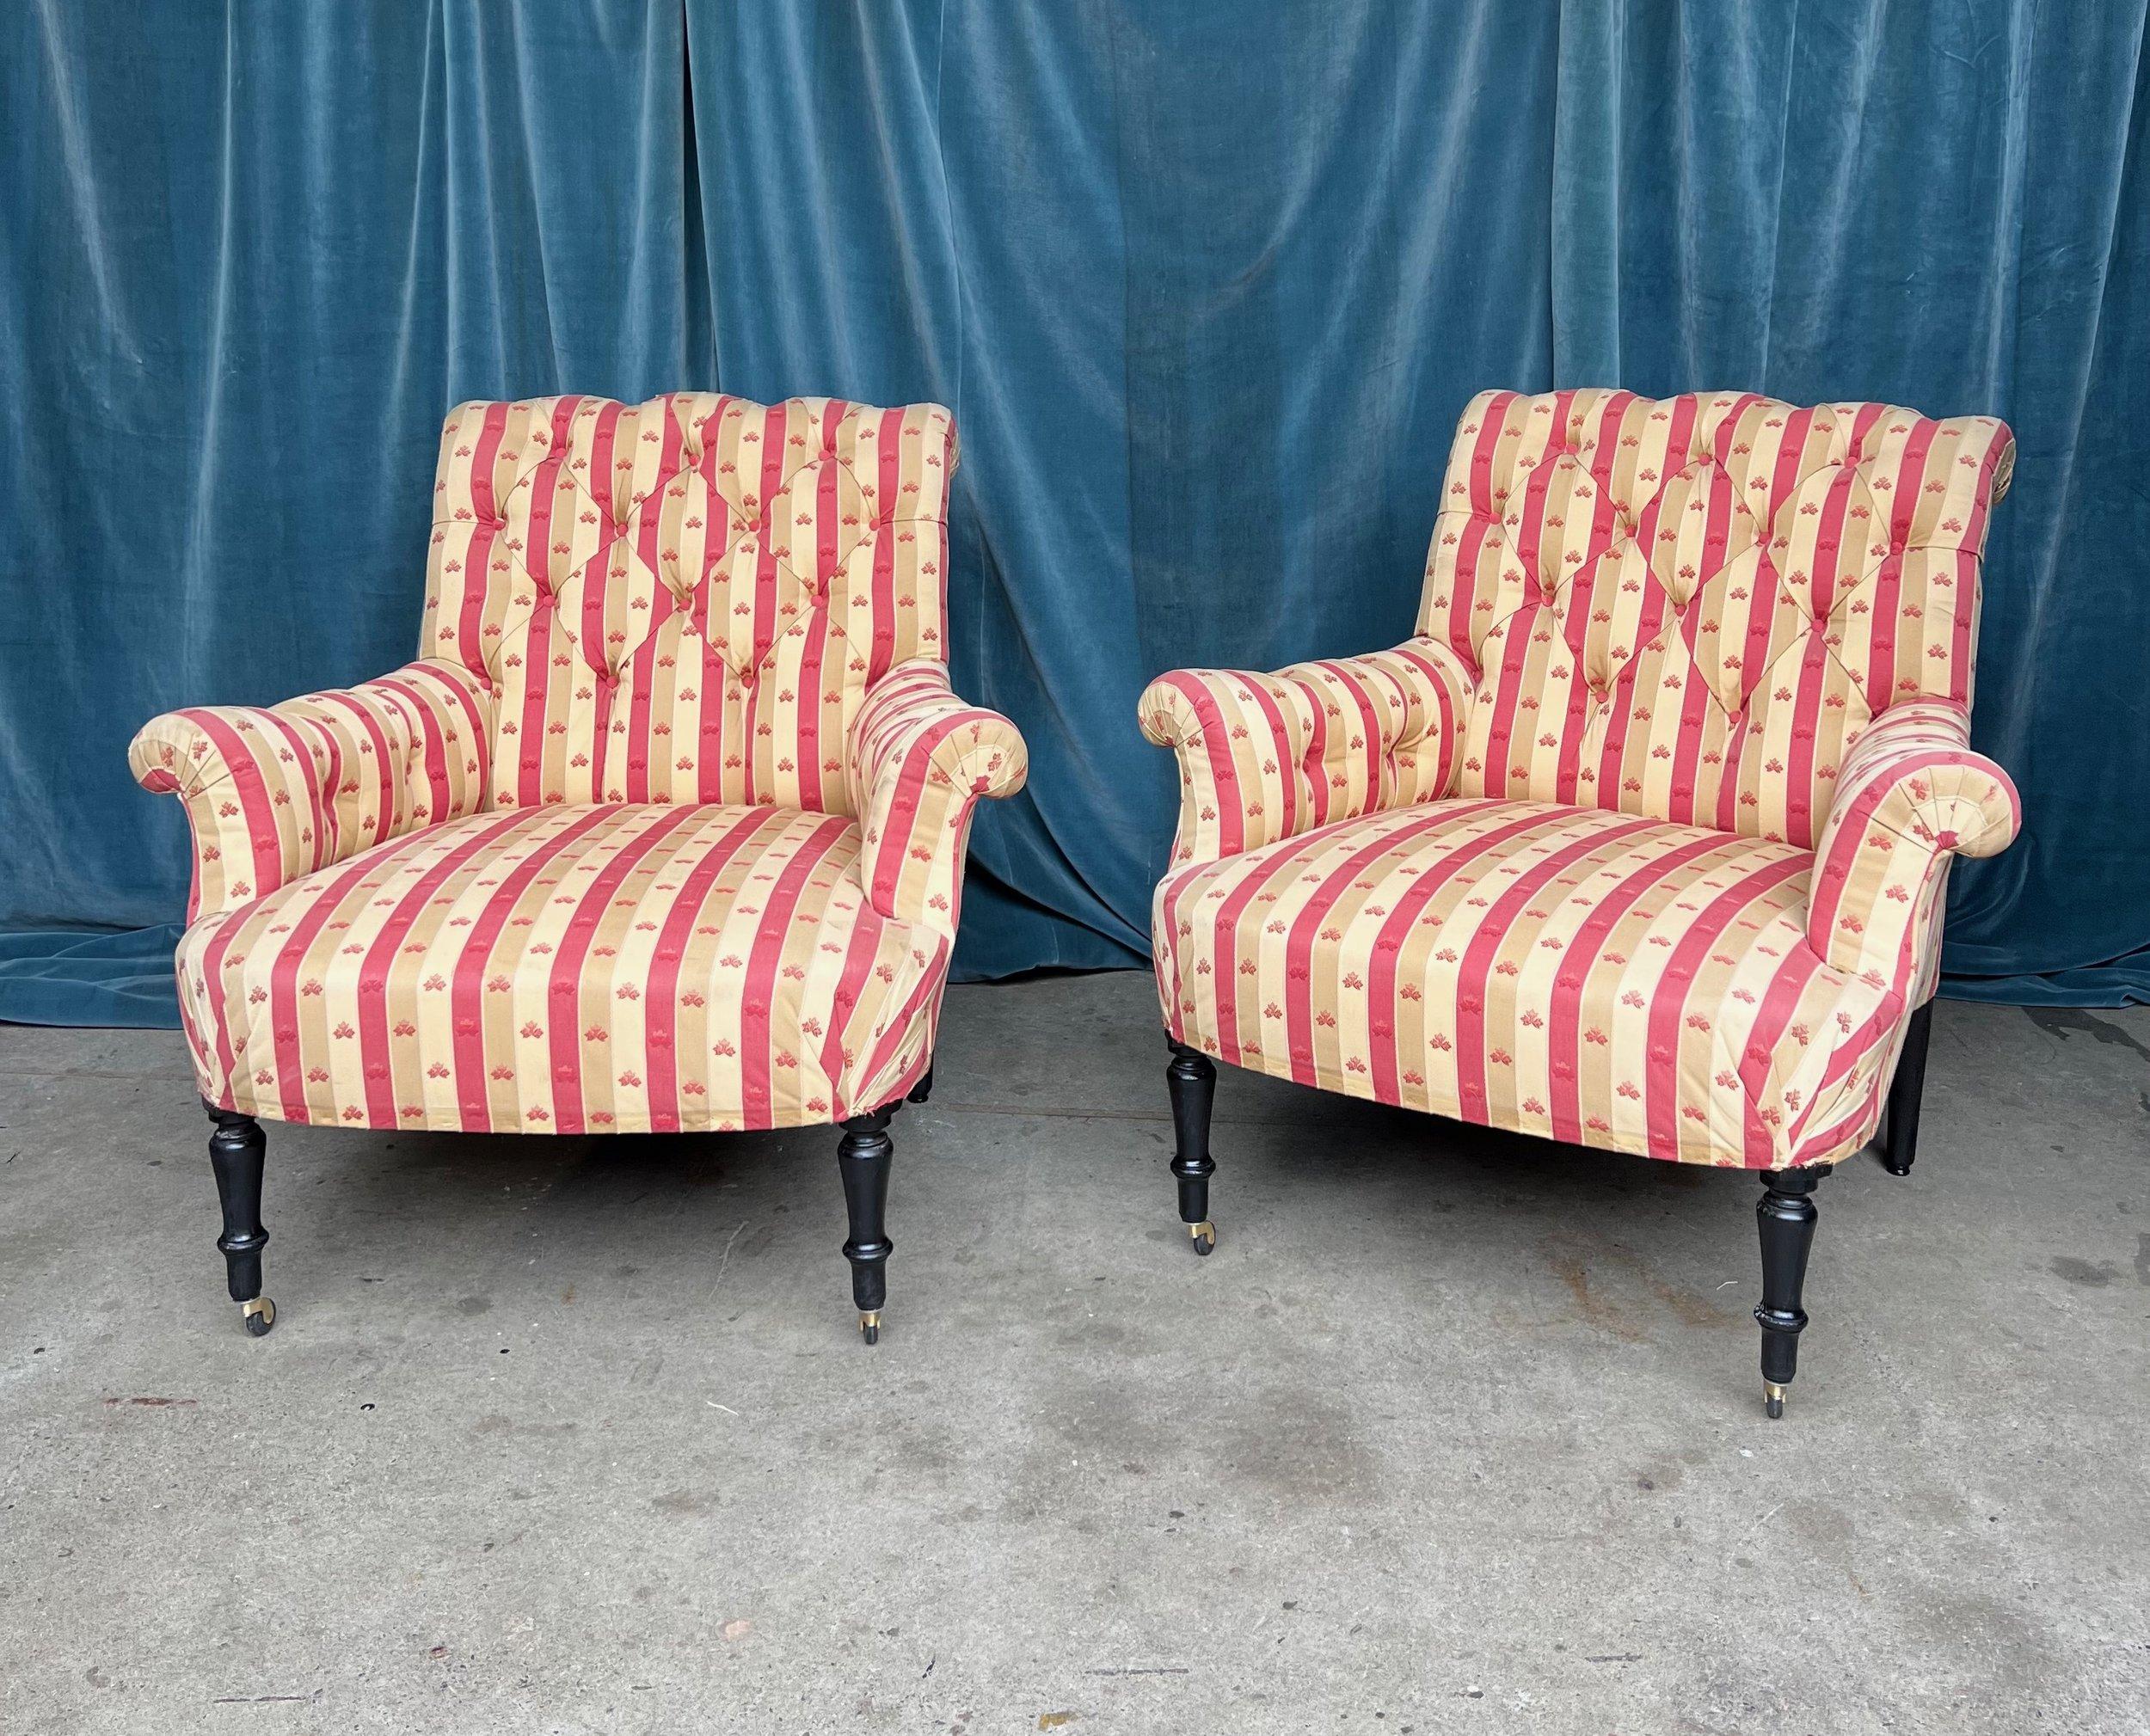 A striking pair of Napoleon III armchairs in a red and tan striped fabric. Crafted with quality and attention to detail not seen in modern-day furniture, these beautiful large scale chairs will make a statement in any room. Upholstered in a classic